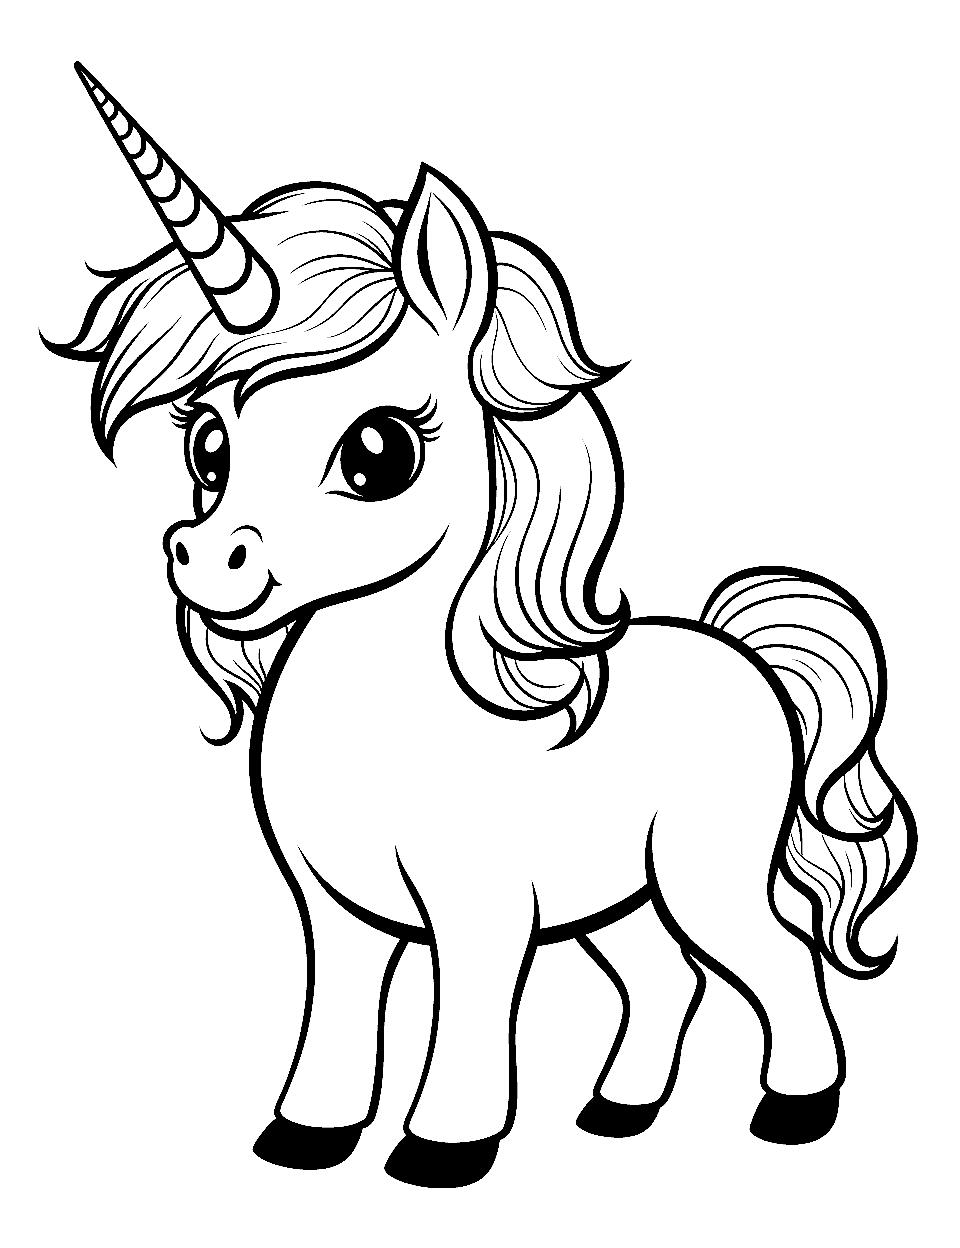 Cute Baby Unicorn Coloring Page - A cute, plump baby unicorn with big eyes. It has soft, fluffy fur and a tiny horn.